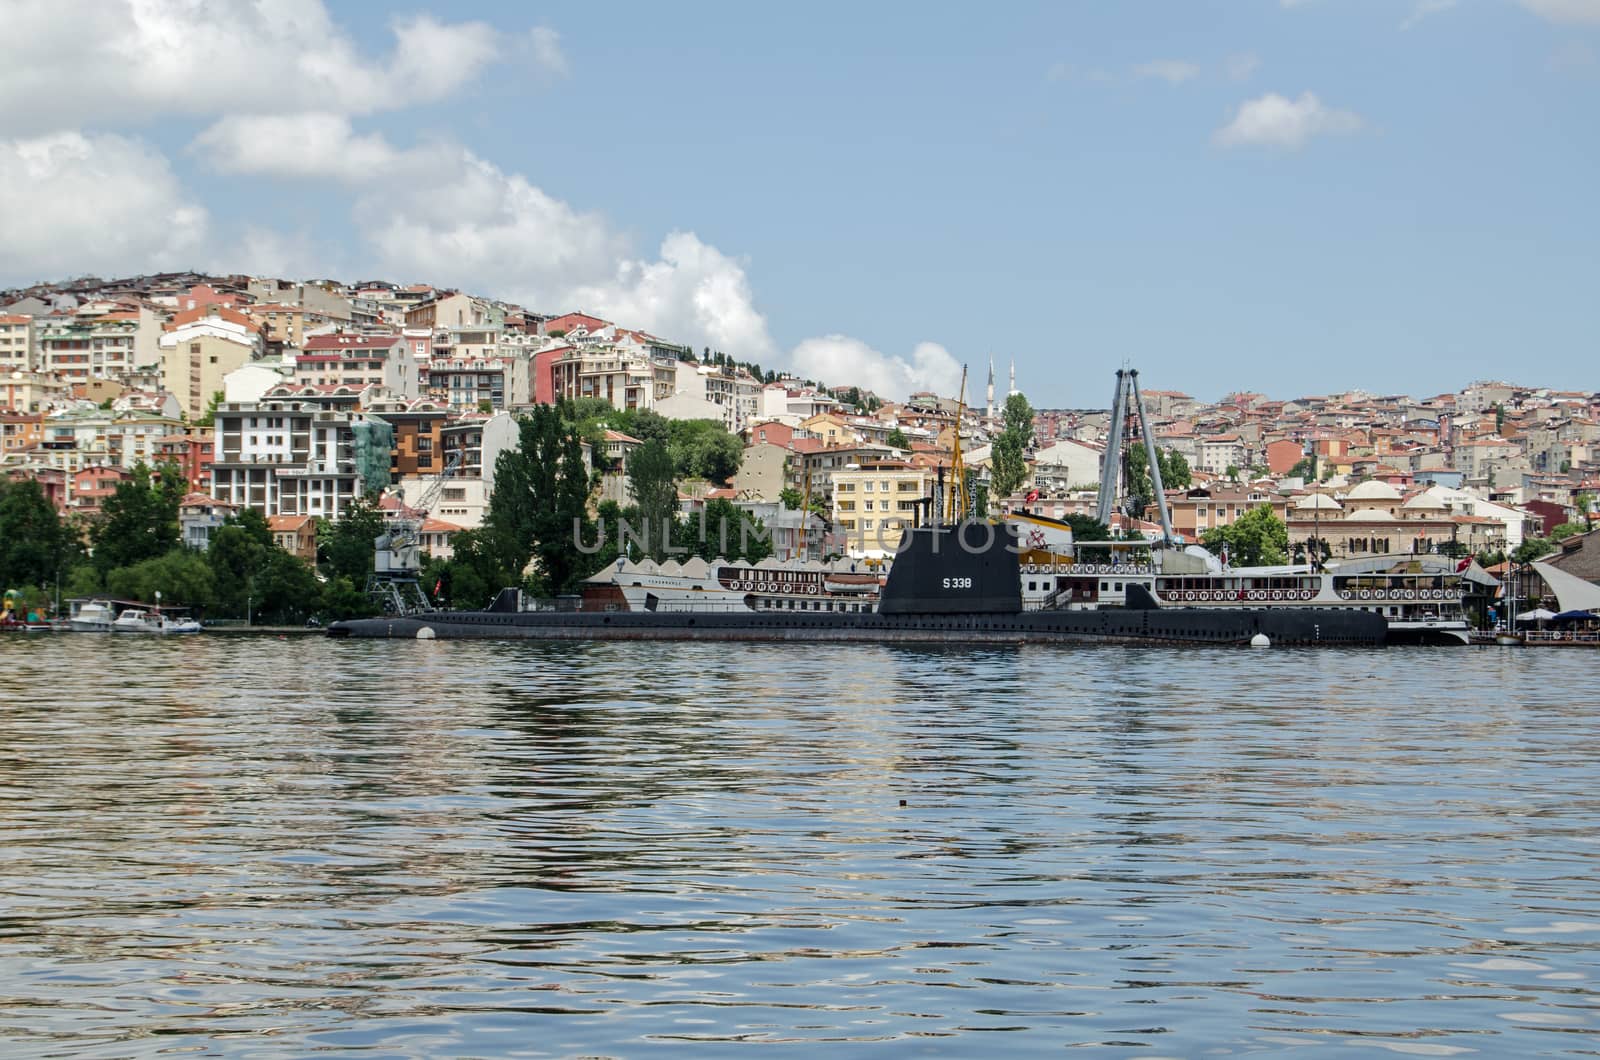 ISTANBUL, TURKEY - JUNE 5, 2016:  View looking north across the Golden Horn towards the Rami M Koc Museum of transport on a sunny afternoon in Istanbul.  There's a World War II submarine together with other ships on display.